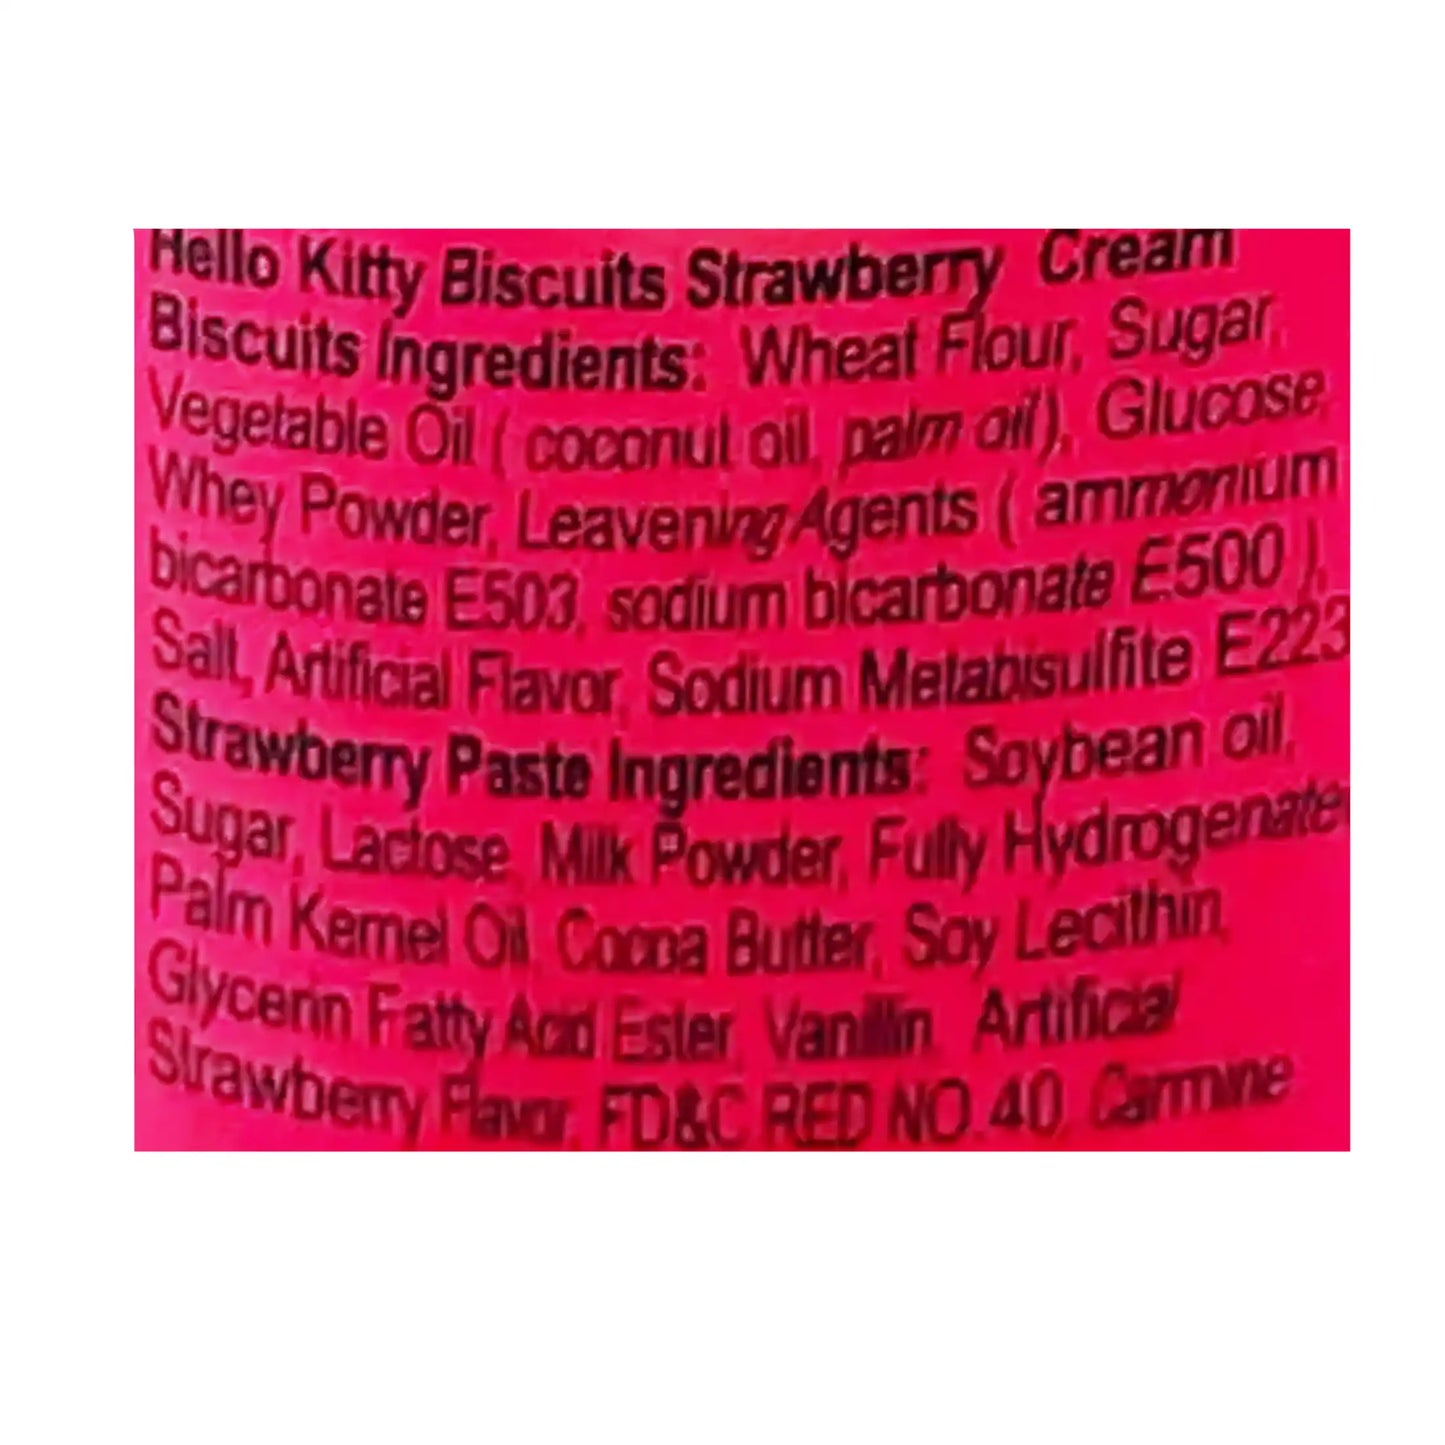 Hello Kitty Biscuits with Strawberry Cream 1.16 oz